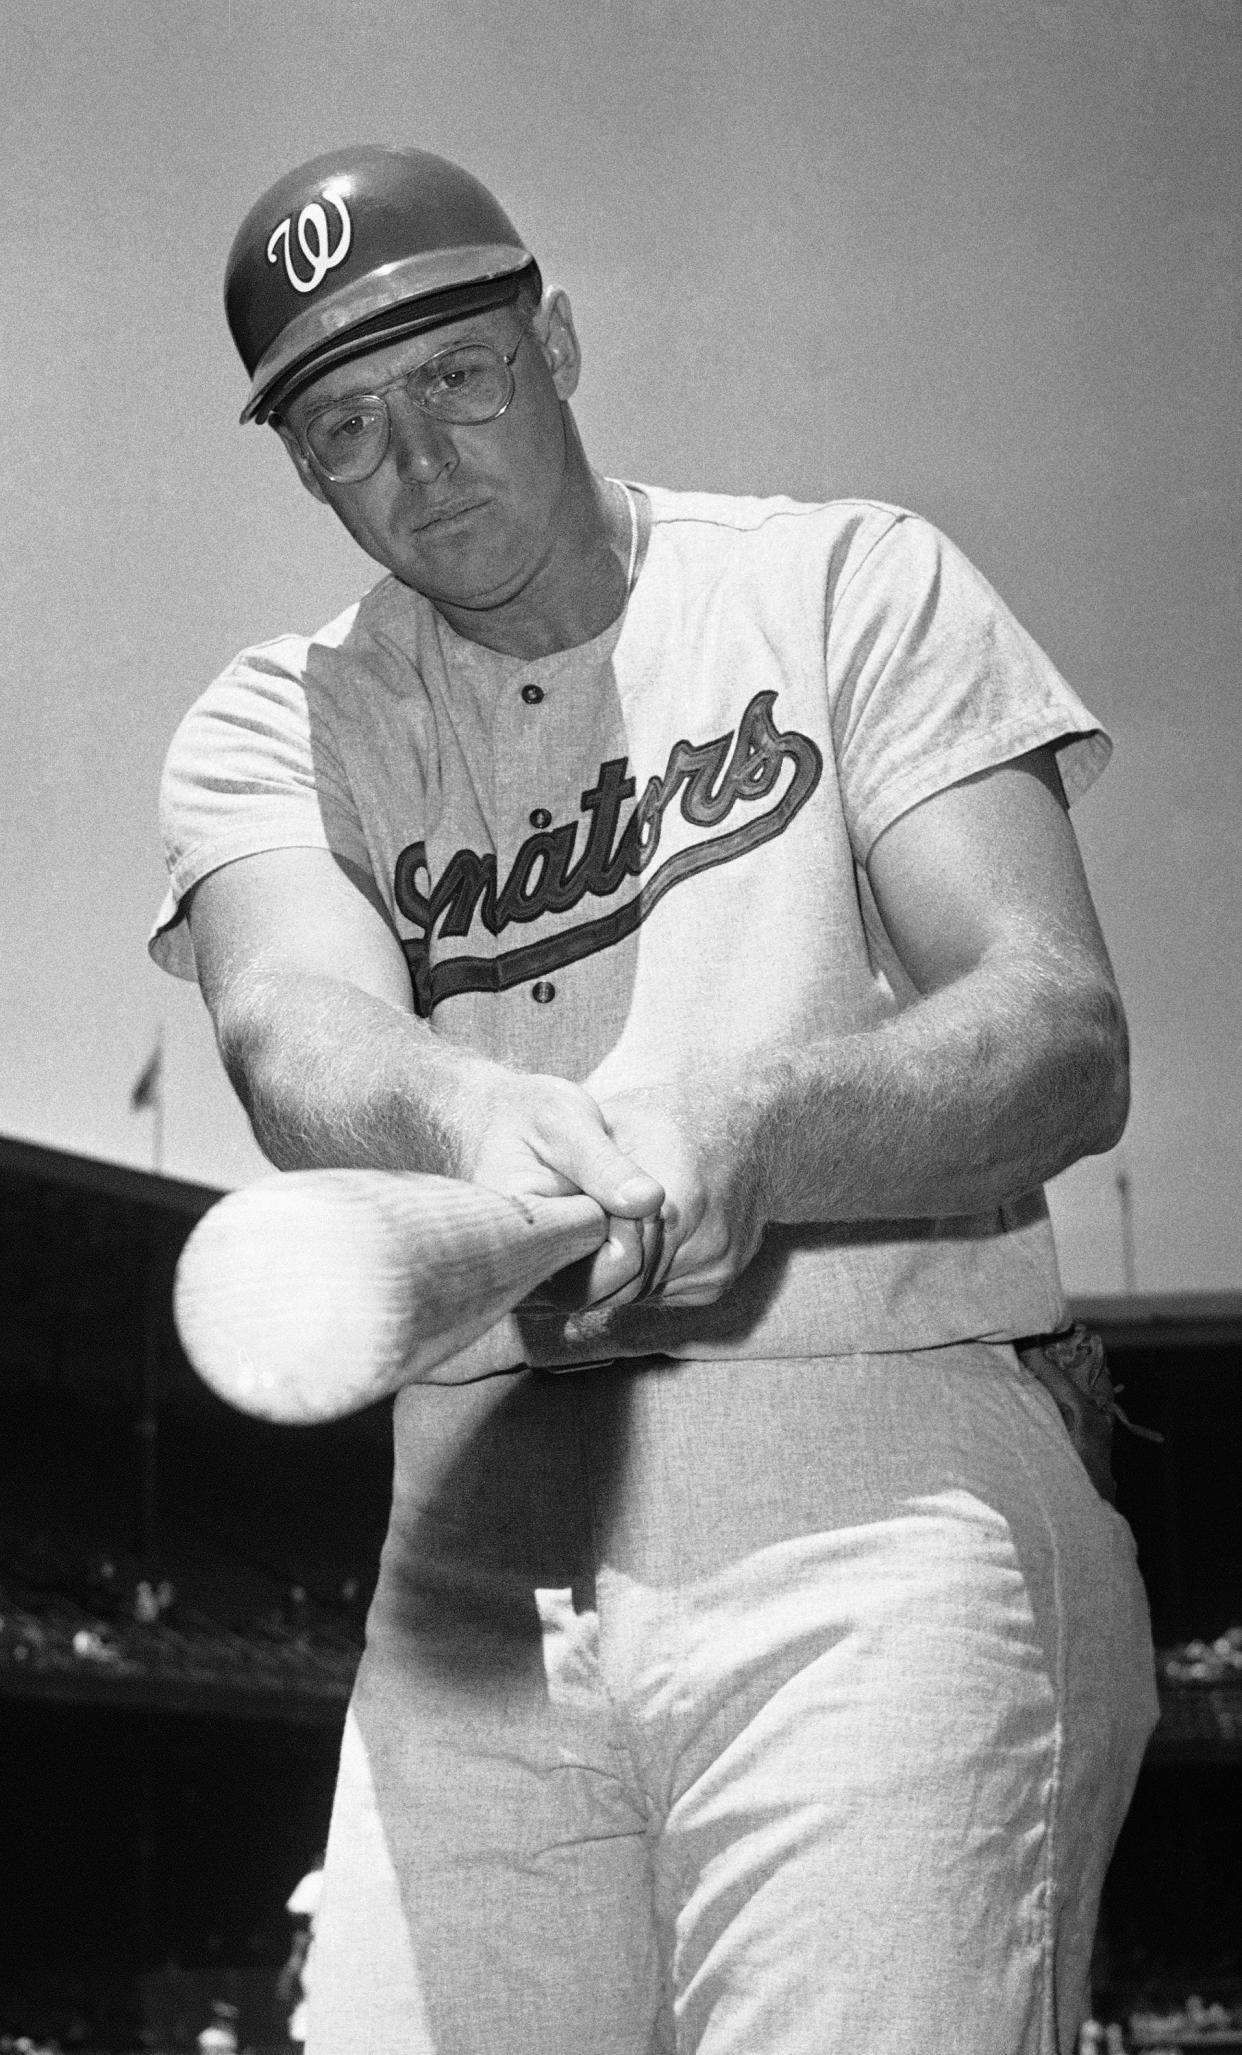 Frank Howard finished his career with 382 home runs, two home run titles, a World Series ring and three All-Star appearances.